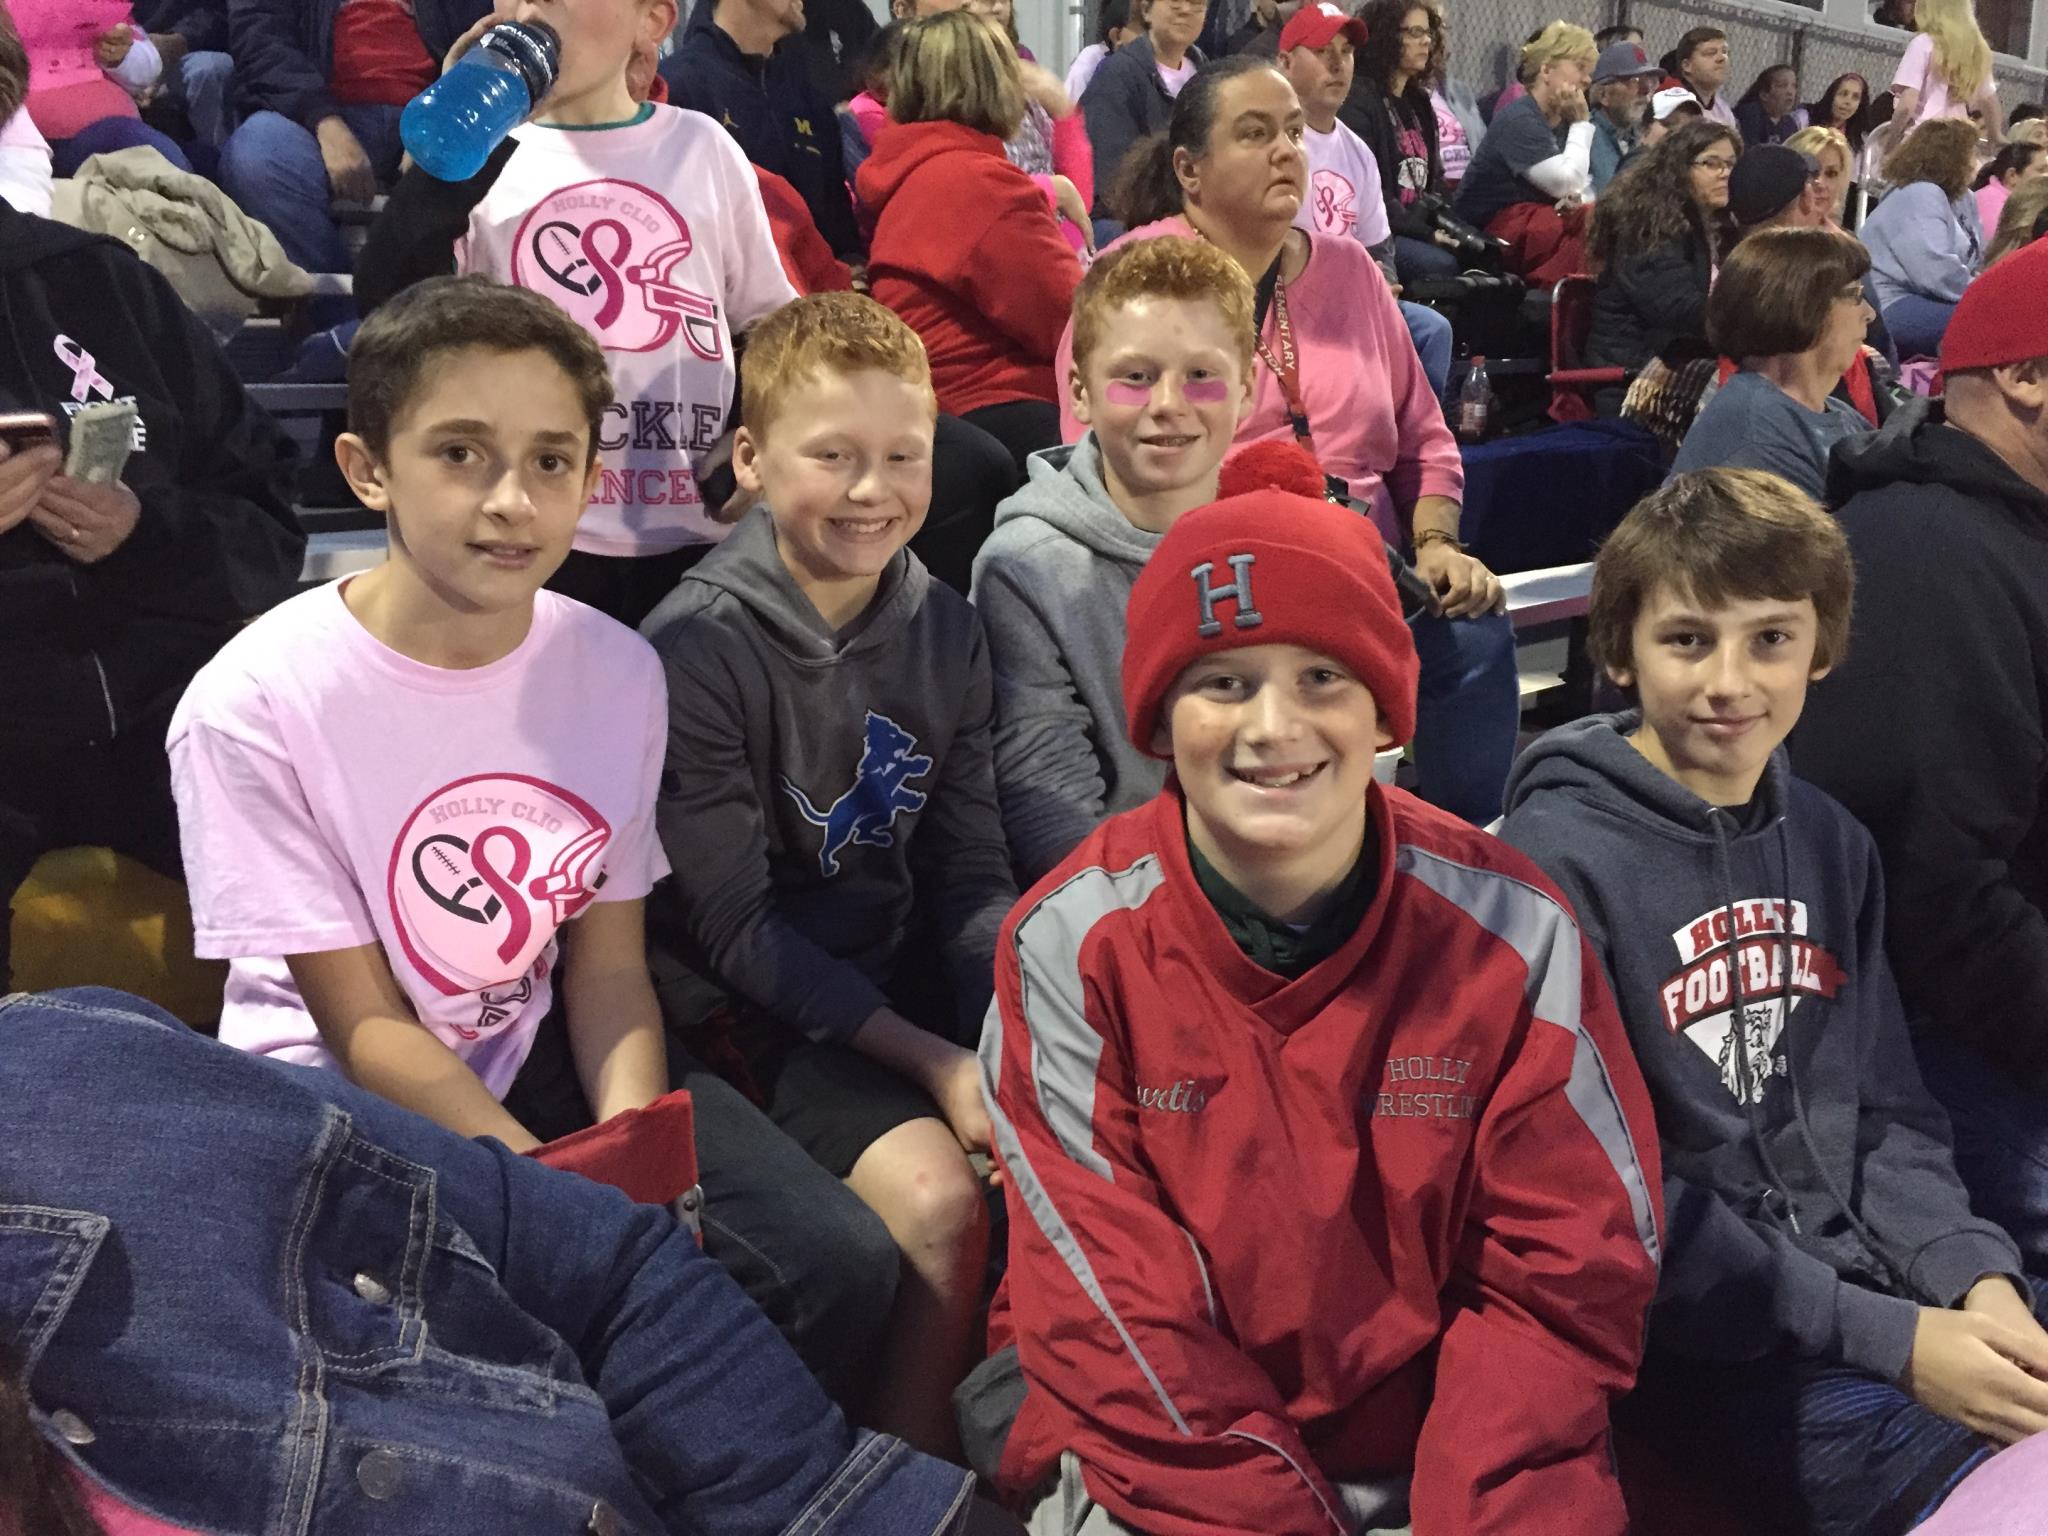 Boys at the pink football game